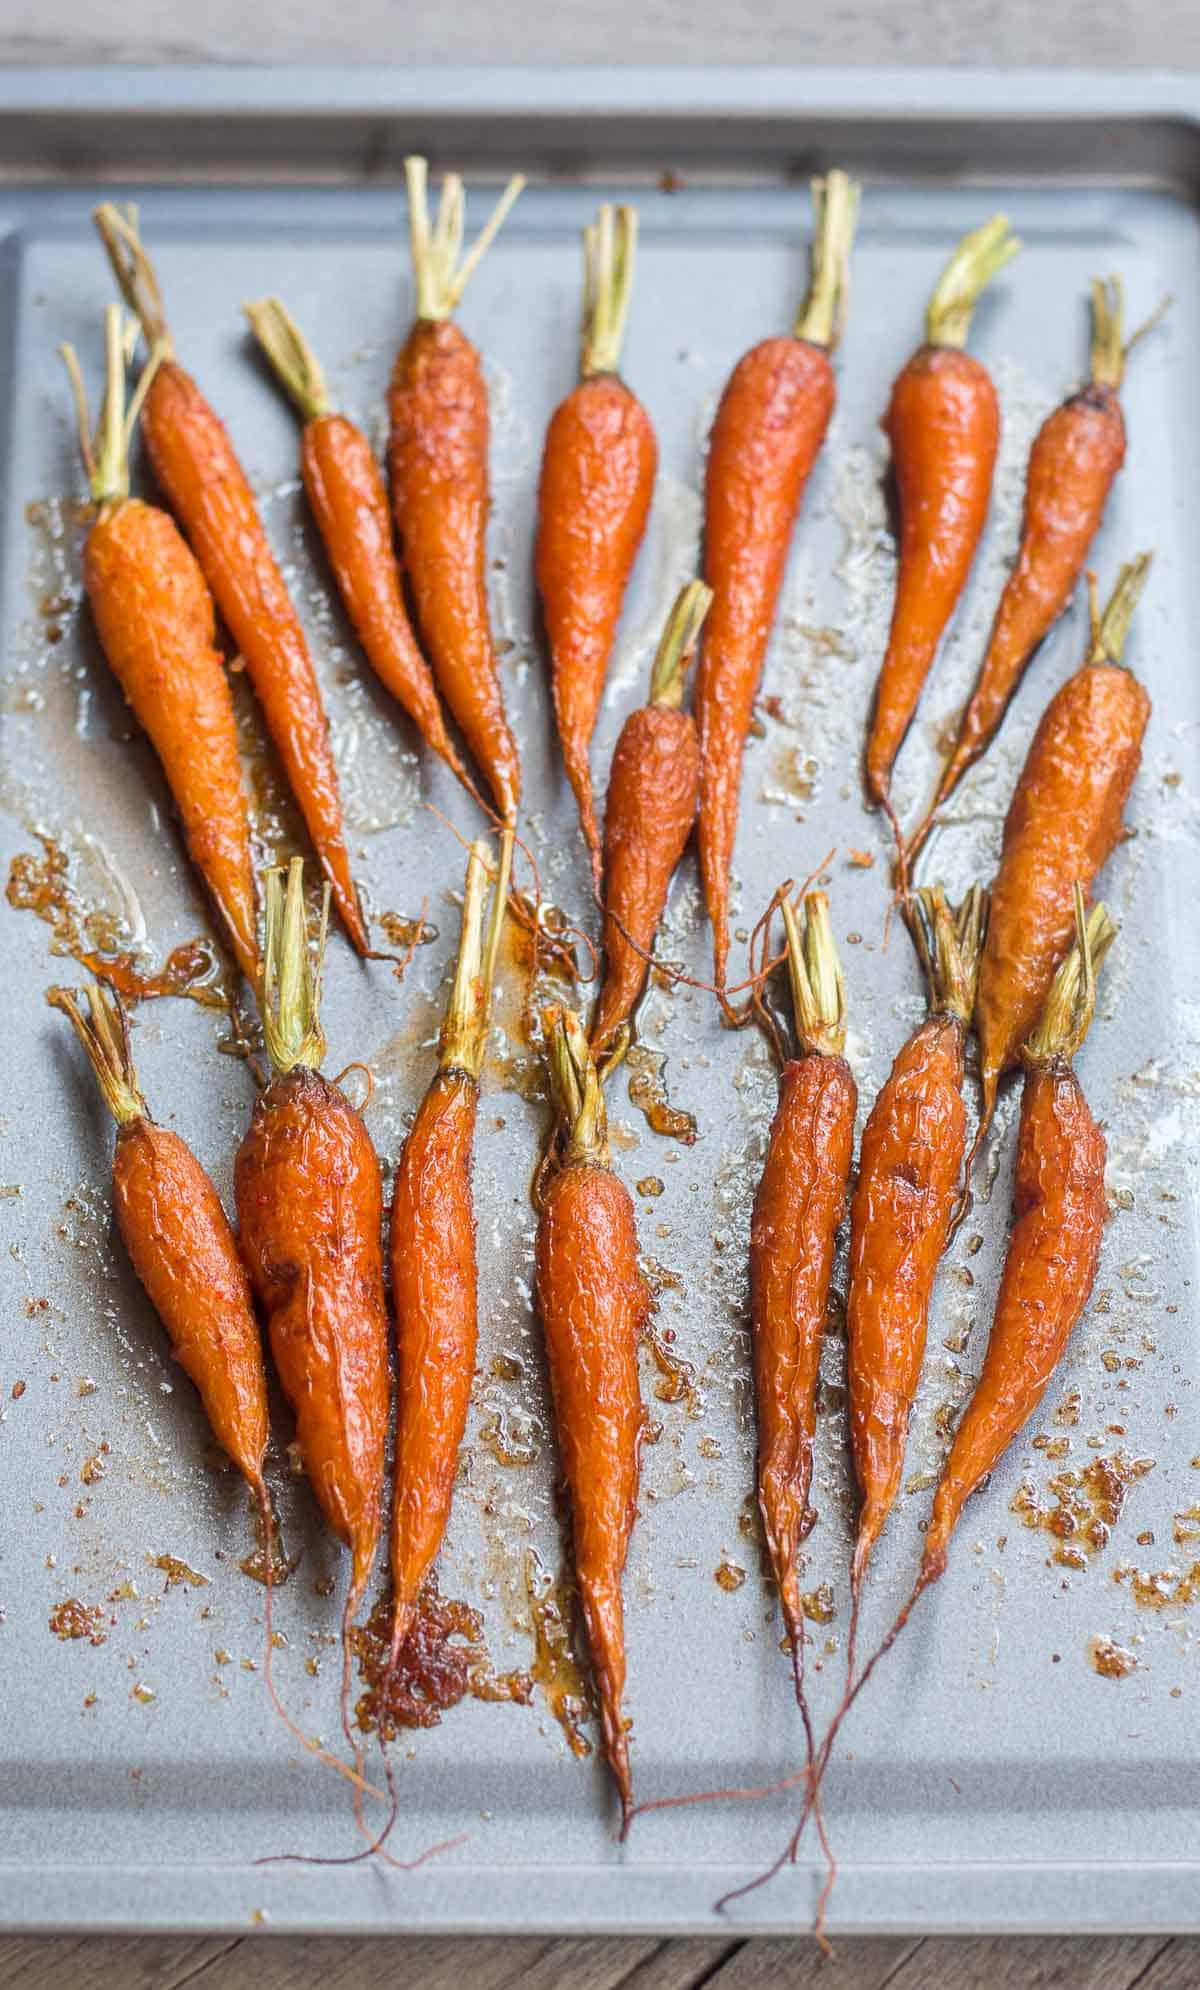 Roasted carrots fresh out of the oven.